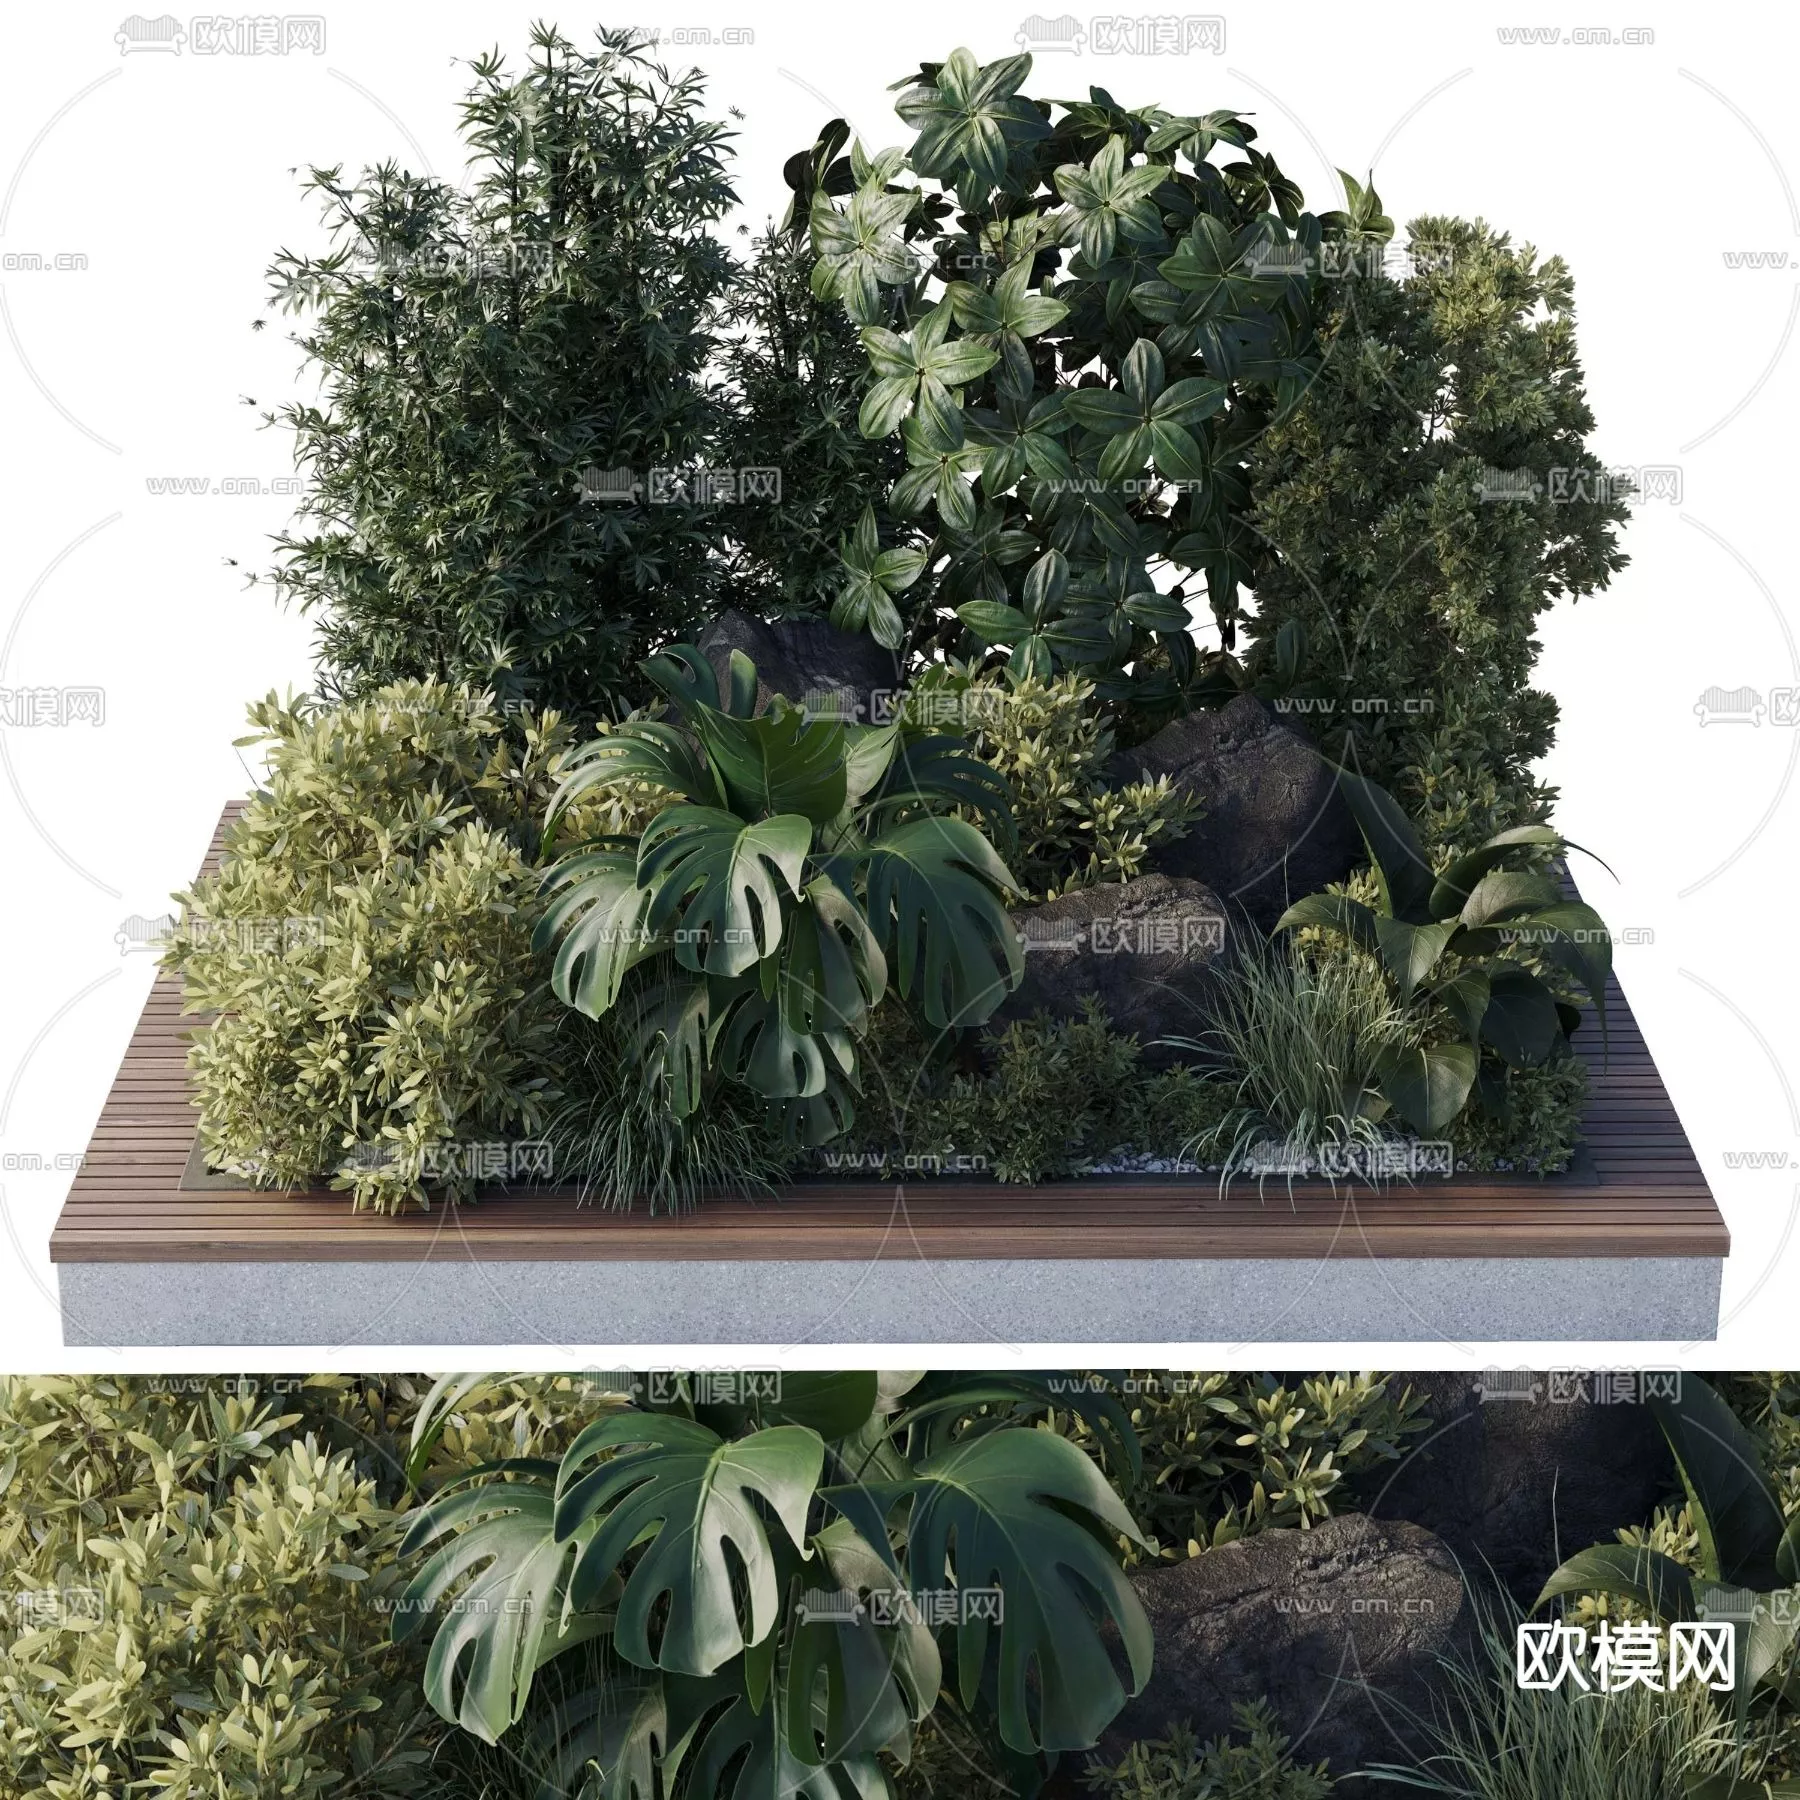 MODERN TREE - SKETCHUP 3D MODEL - VRAY OR ENSCAPE - ID15380